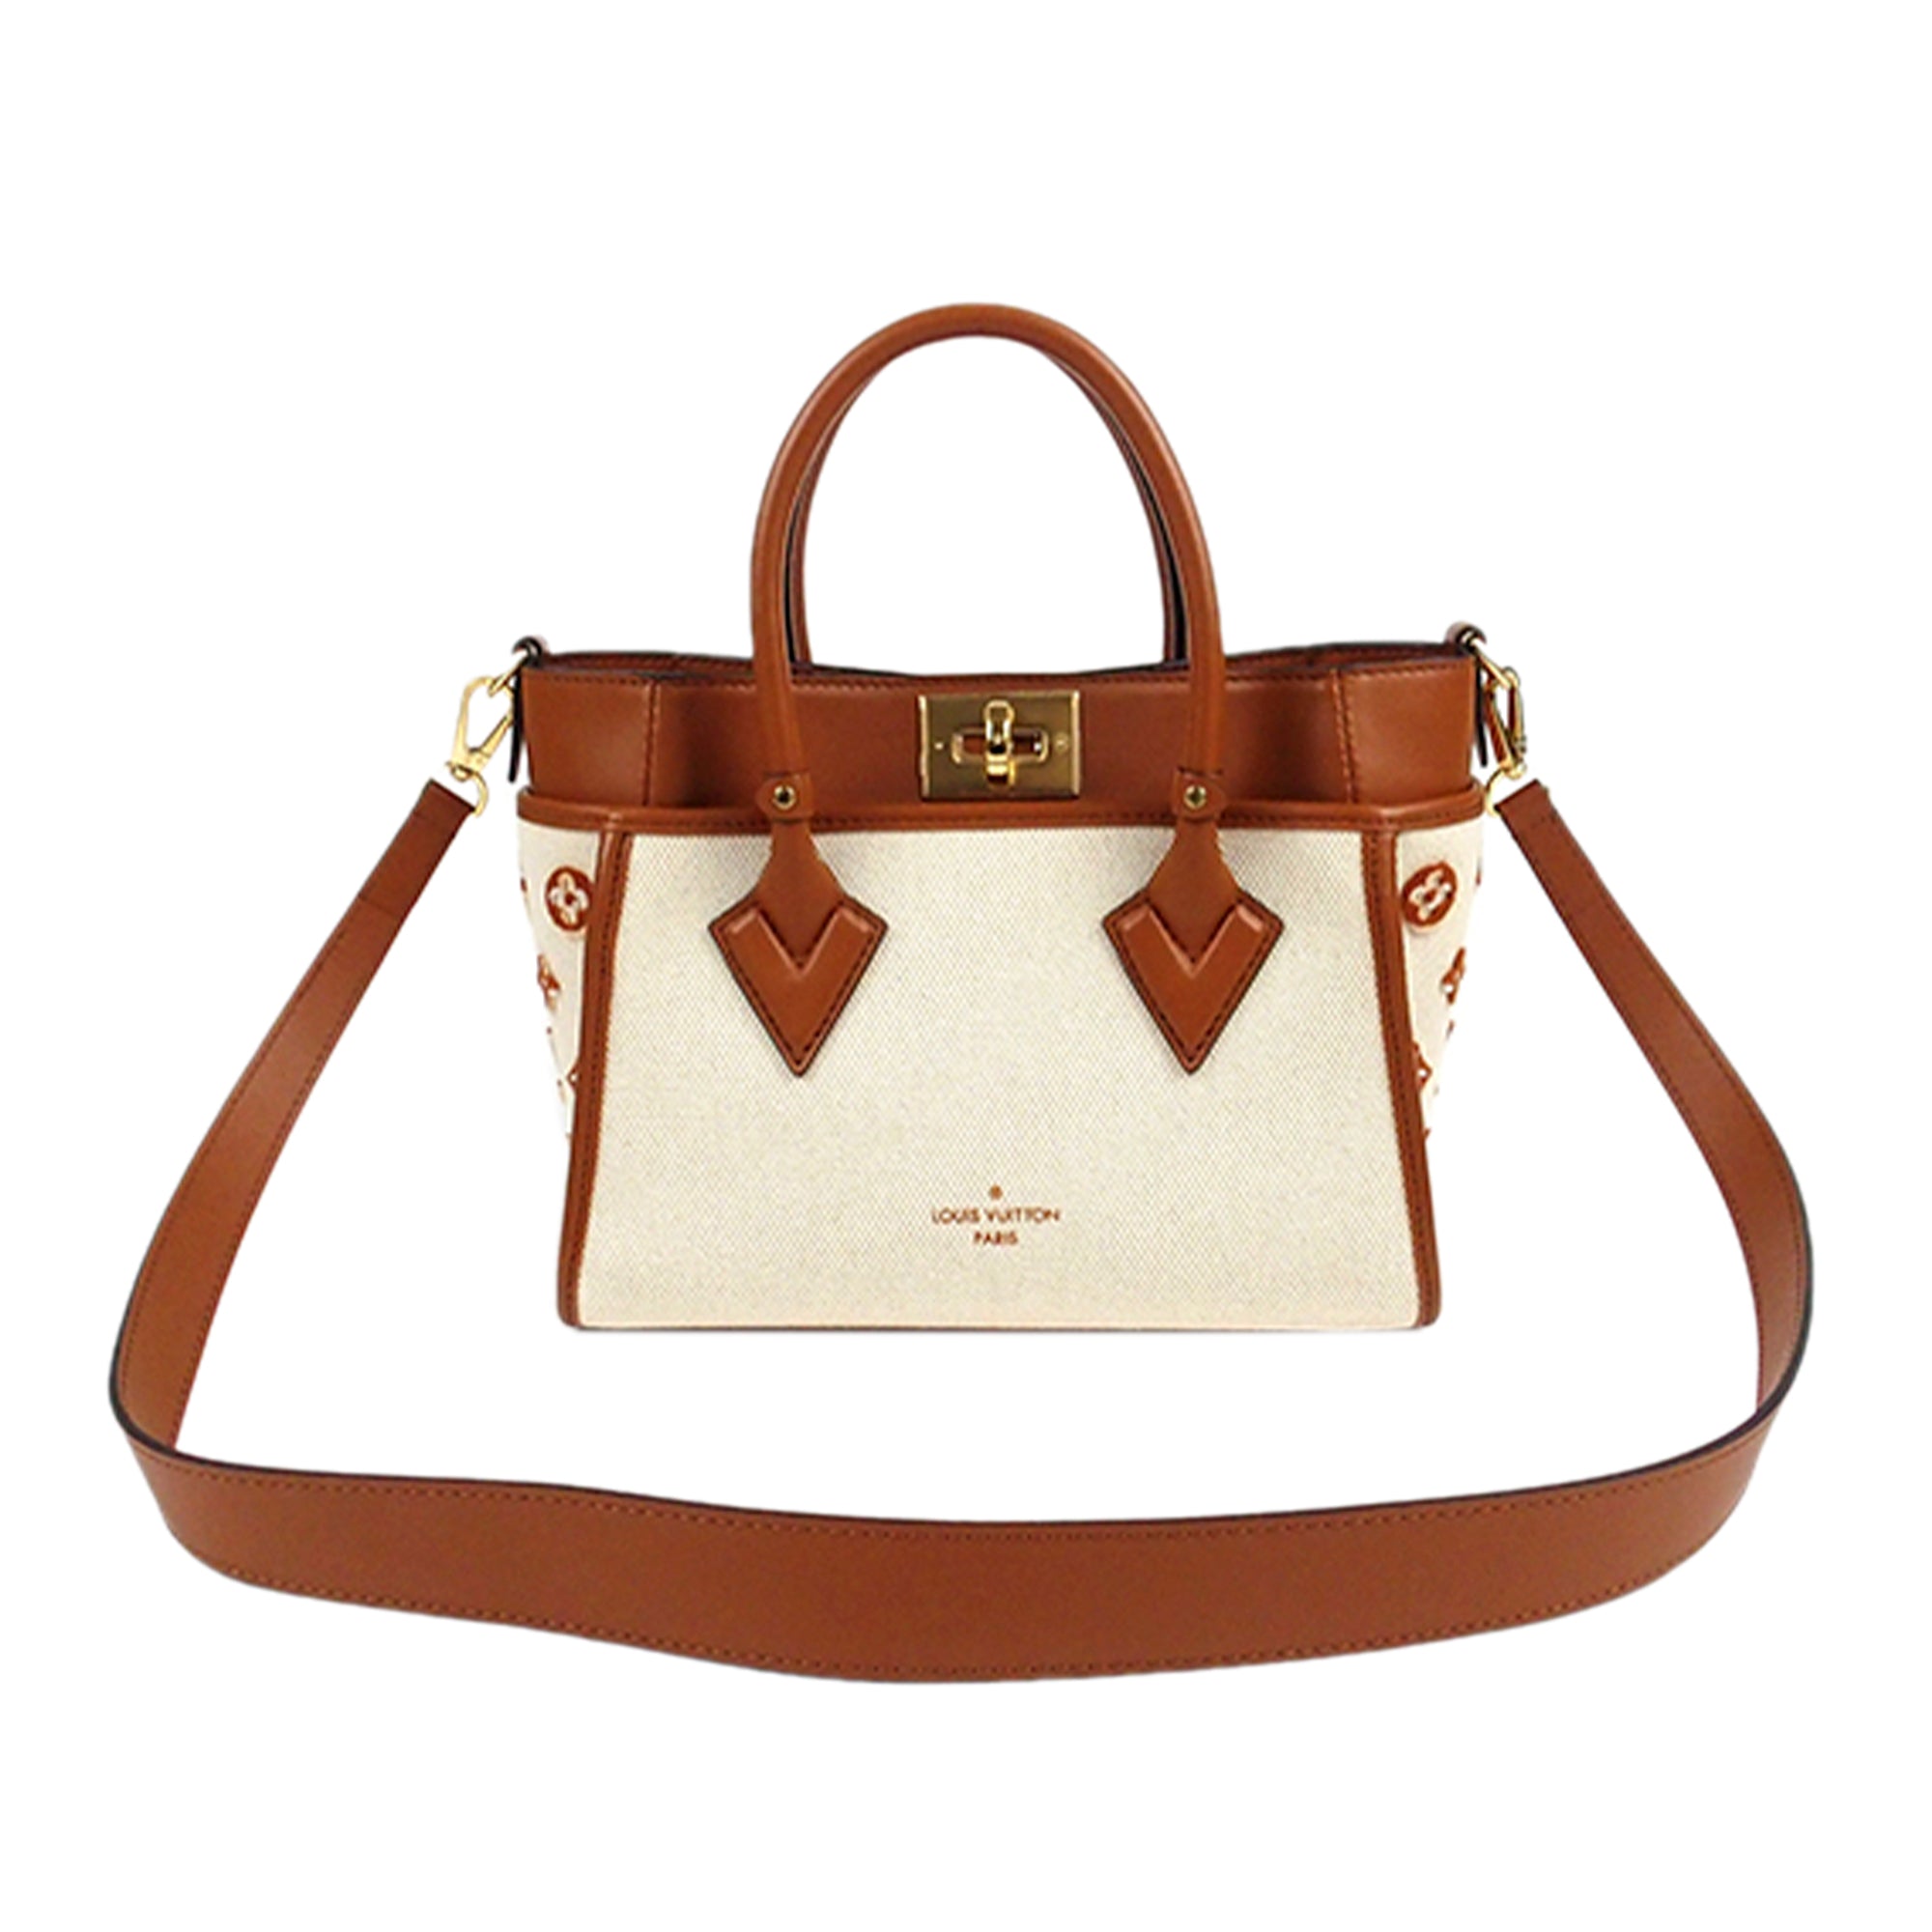 On My Side PM High End Leathers - Women - Handbags